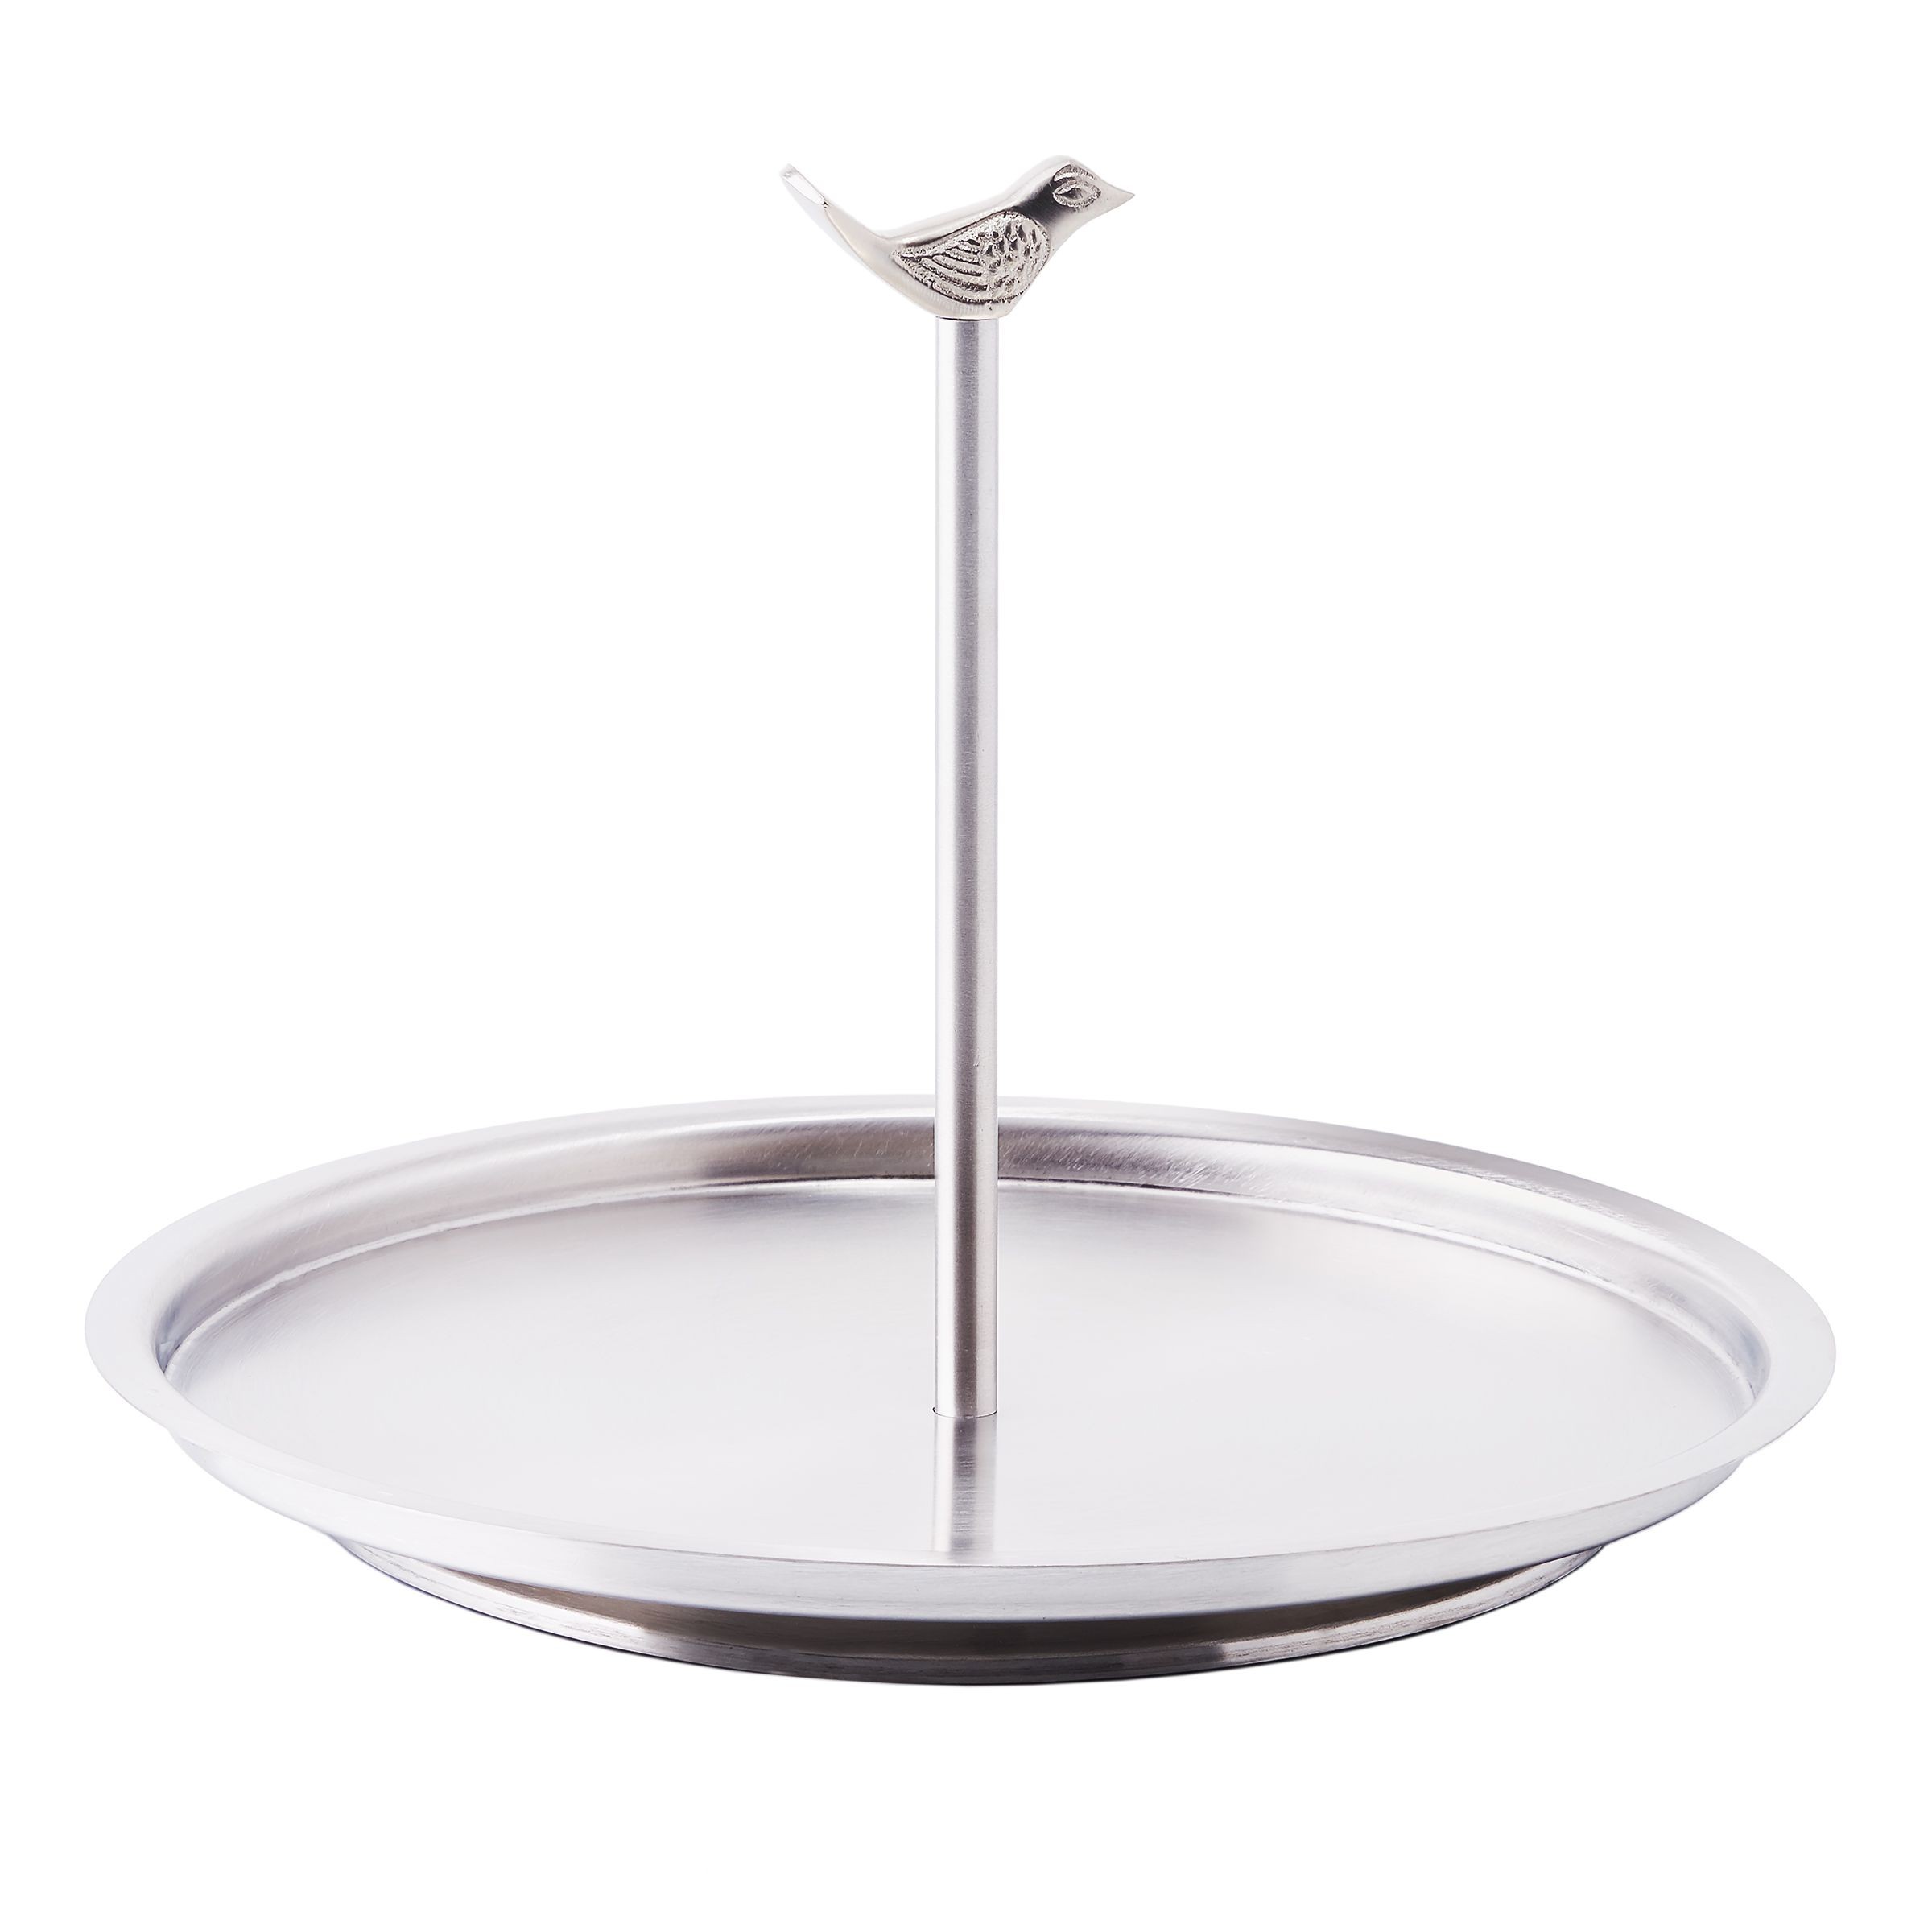 Old Dutch International 2290 Churp Single-Tier Stainless Steel Serving Tray with Bird Knob, 11 1/2" Dia.